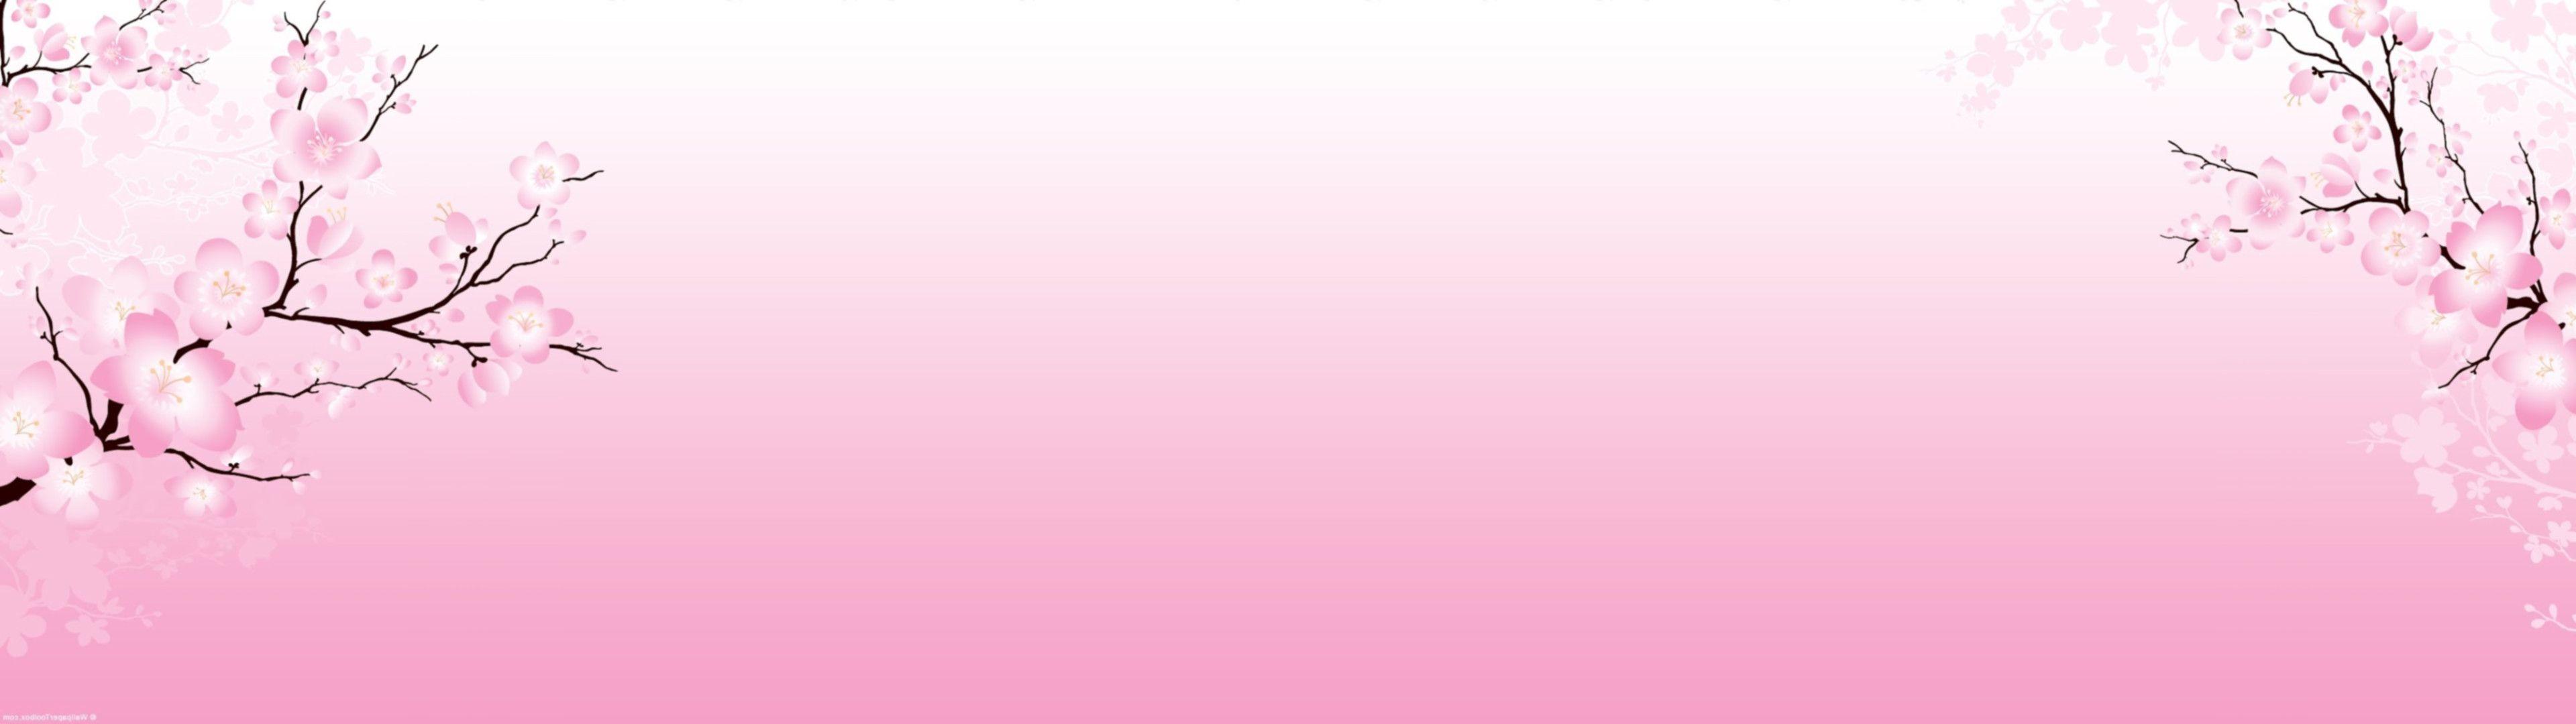 Pink Dual Monitor Wallpapers - Top Free Pink Dual Monitor Backgrounds